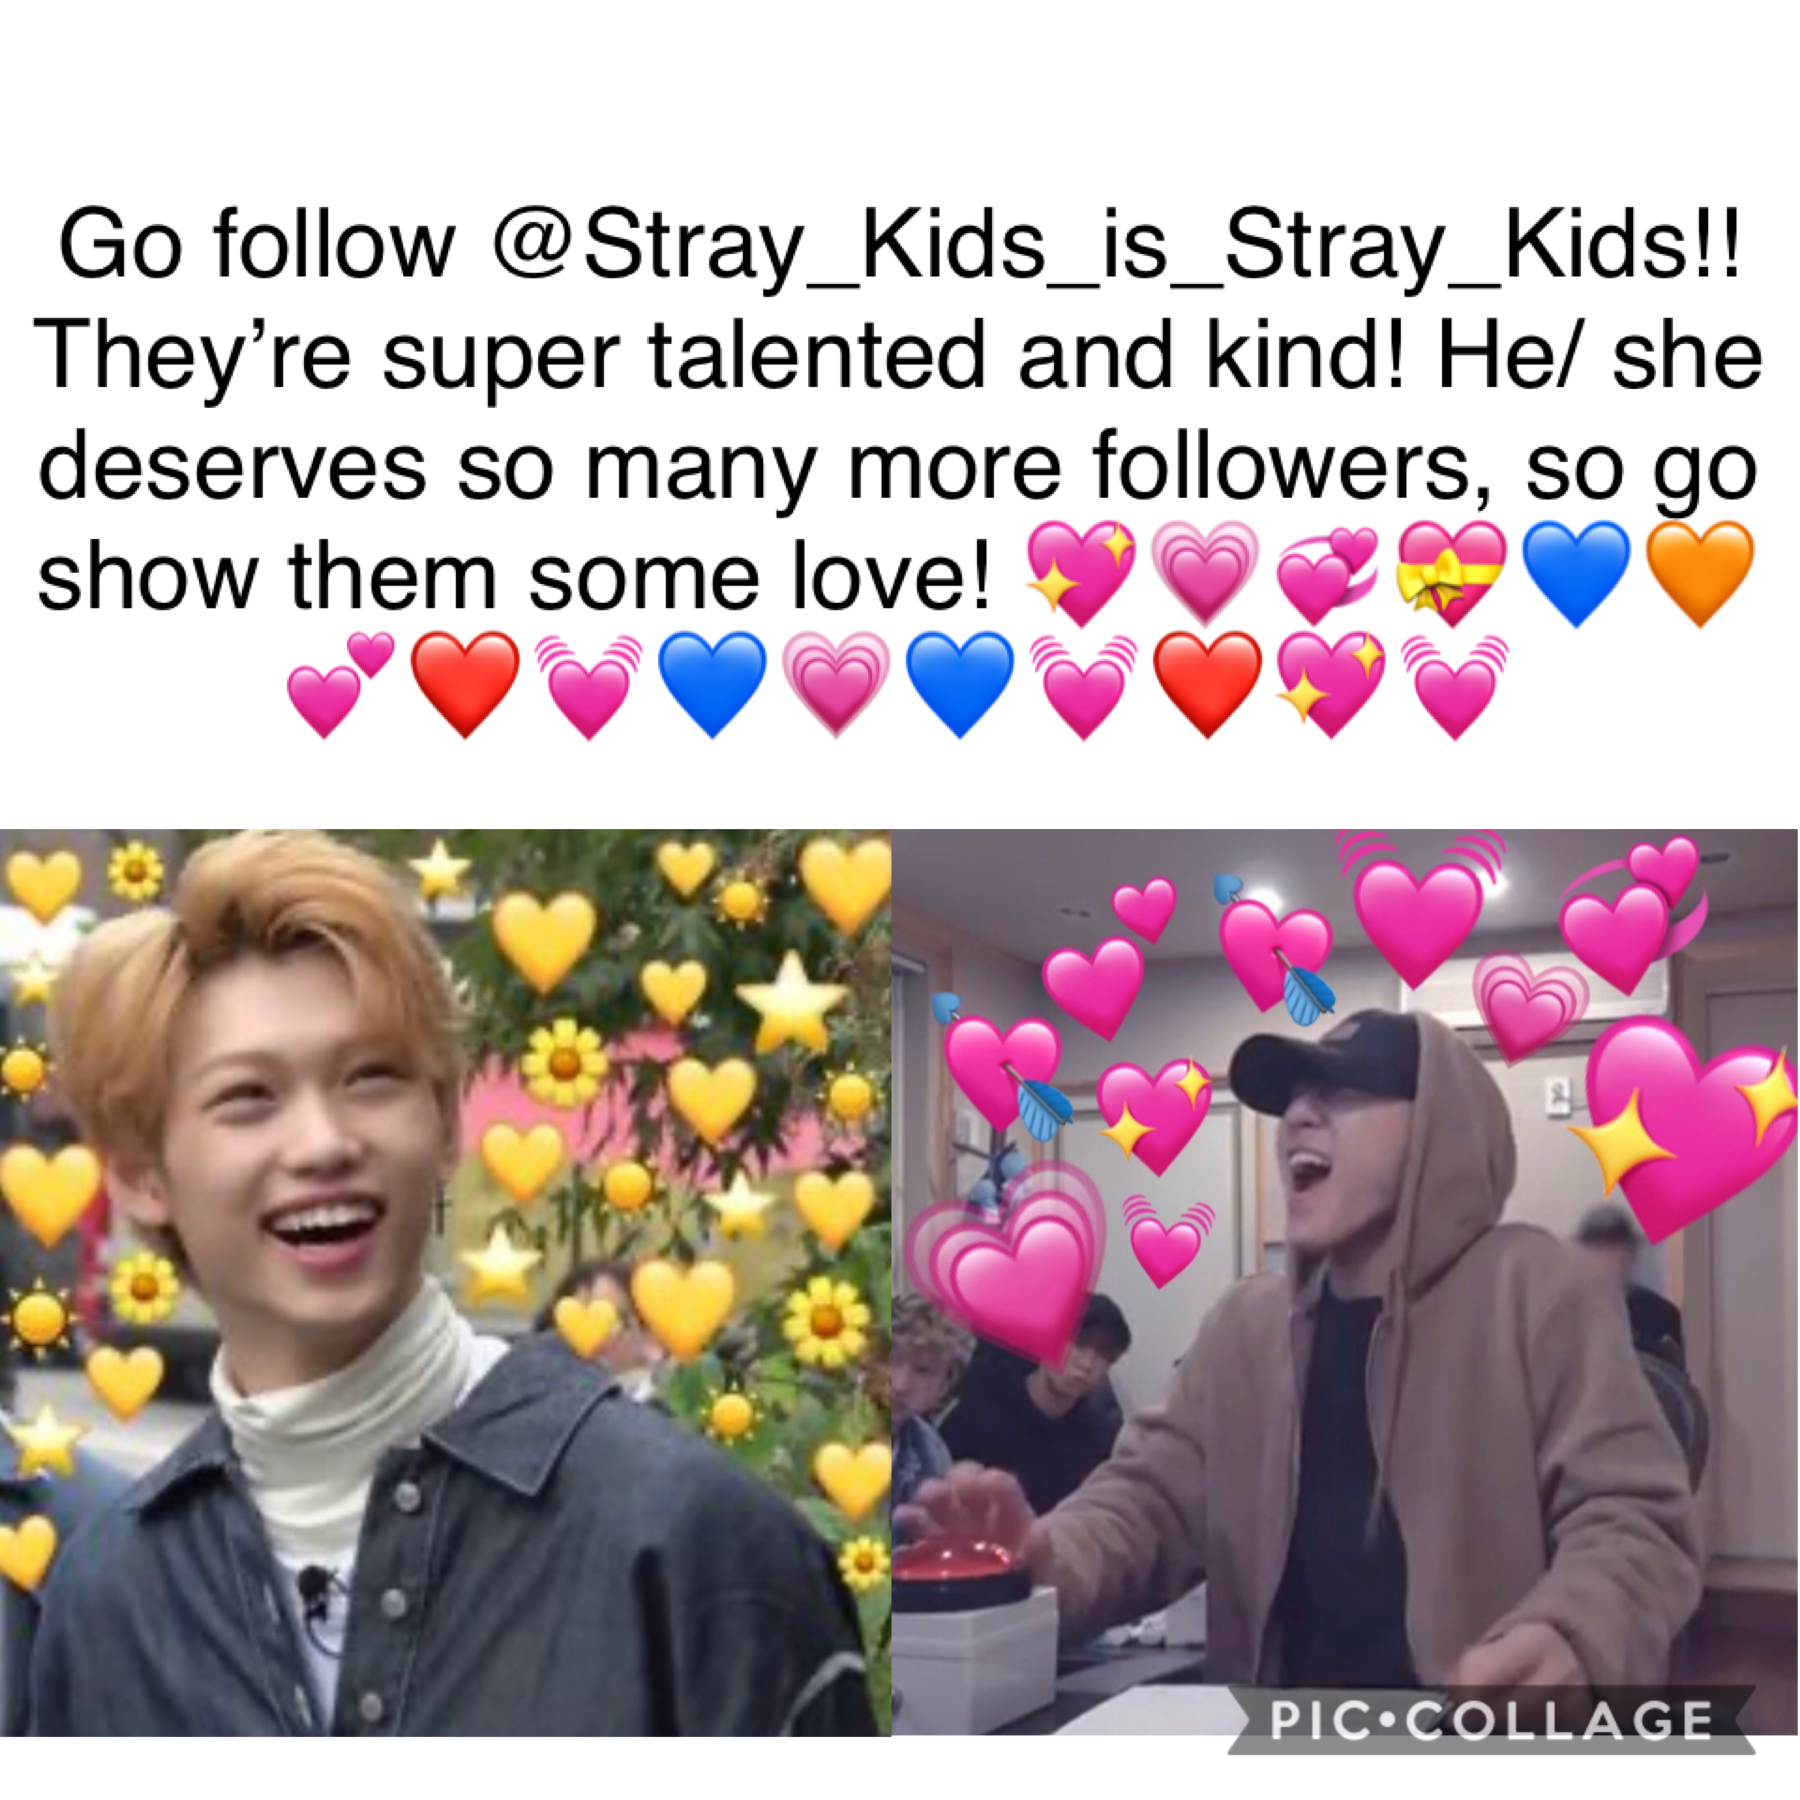 please go follow them now! they deserve all the love in the world 🥺💛💙💚❤️🧡💜💖💘